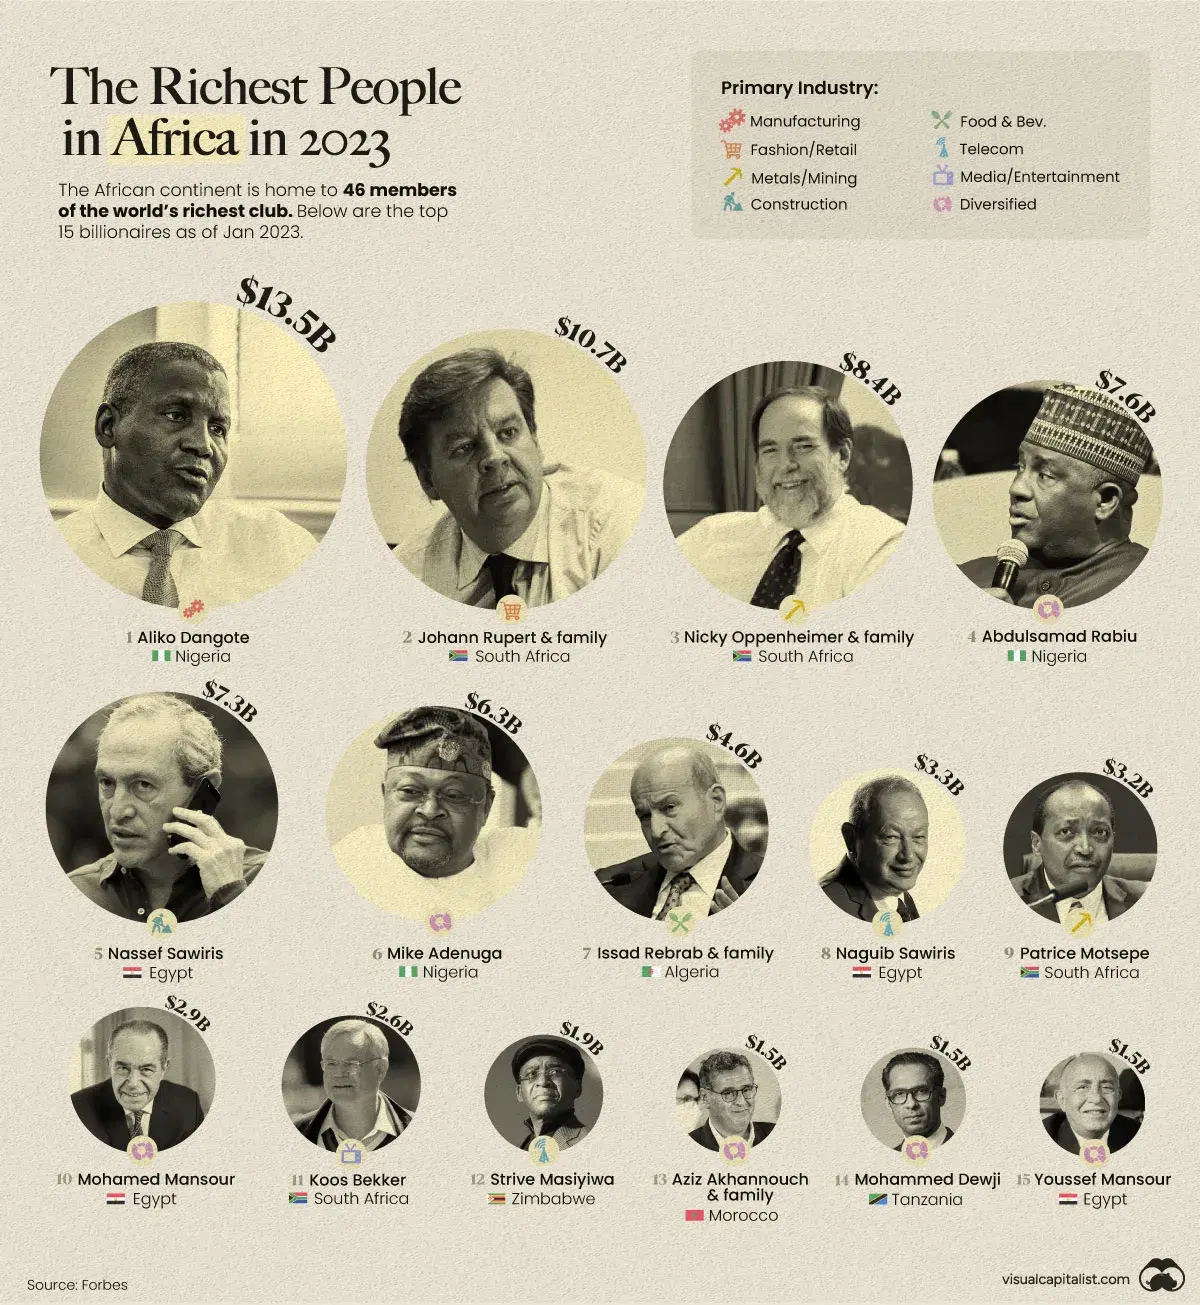 Who Are the Richest People in Africa?